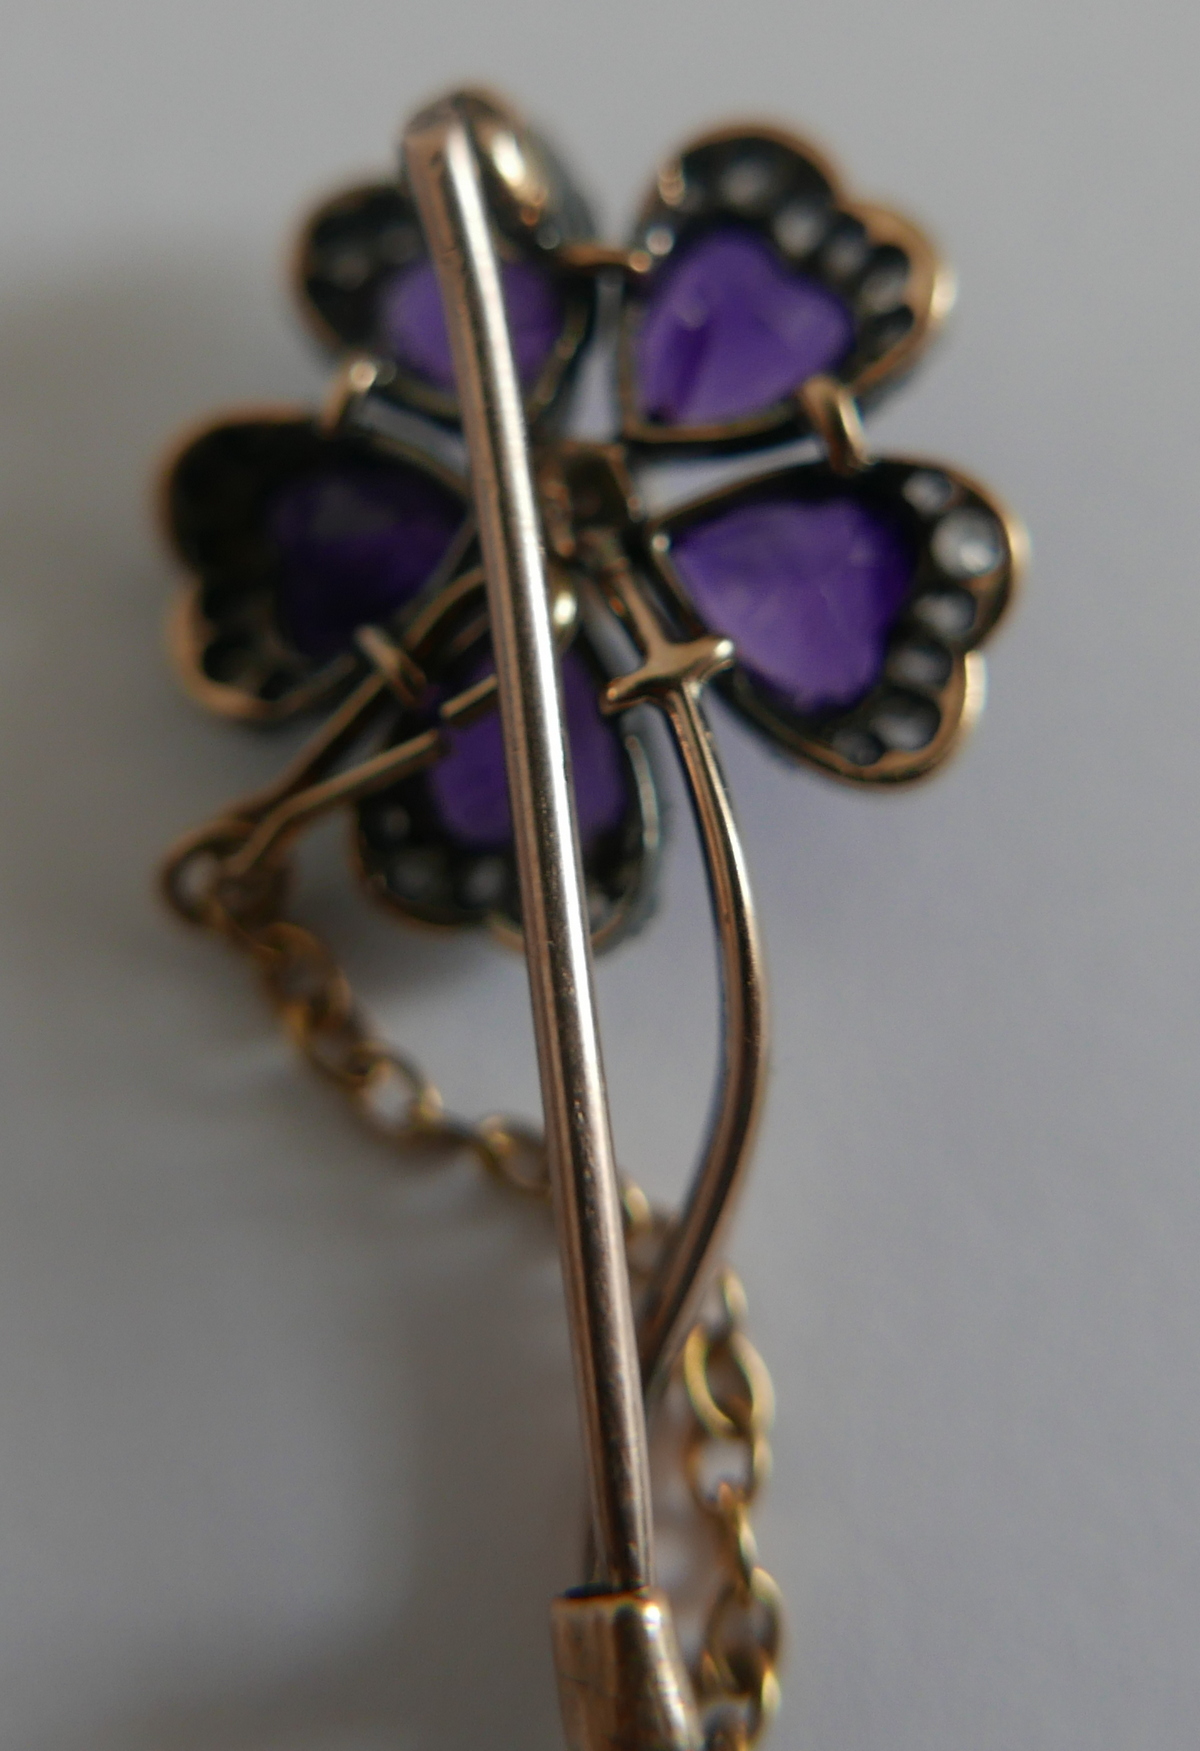 Antique Diamond-Amethyst and Pearl Brooch 34mm x 18mm. - Image 4 of 4